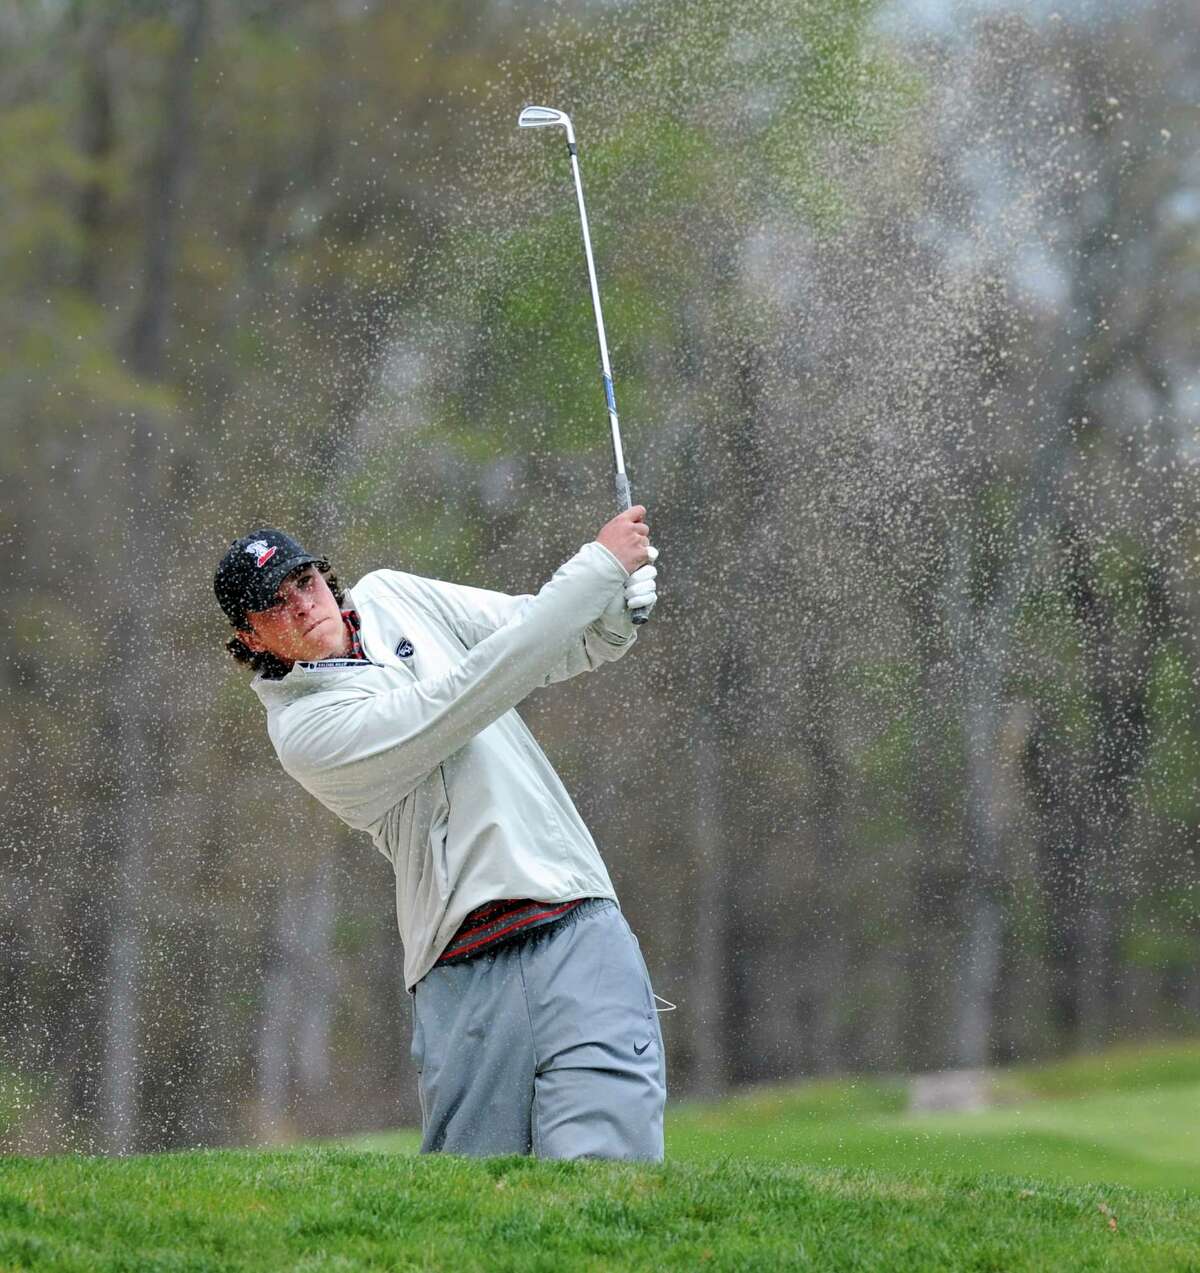 Justin Clark of New Canaan High School blasts out of a sand-trap onto the first green during the 2016 Brunswick Invitational Golf Tournament at the Round Hill Club in Greenwich, Conn., Thursday, April 28, 2016.